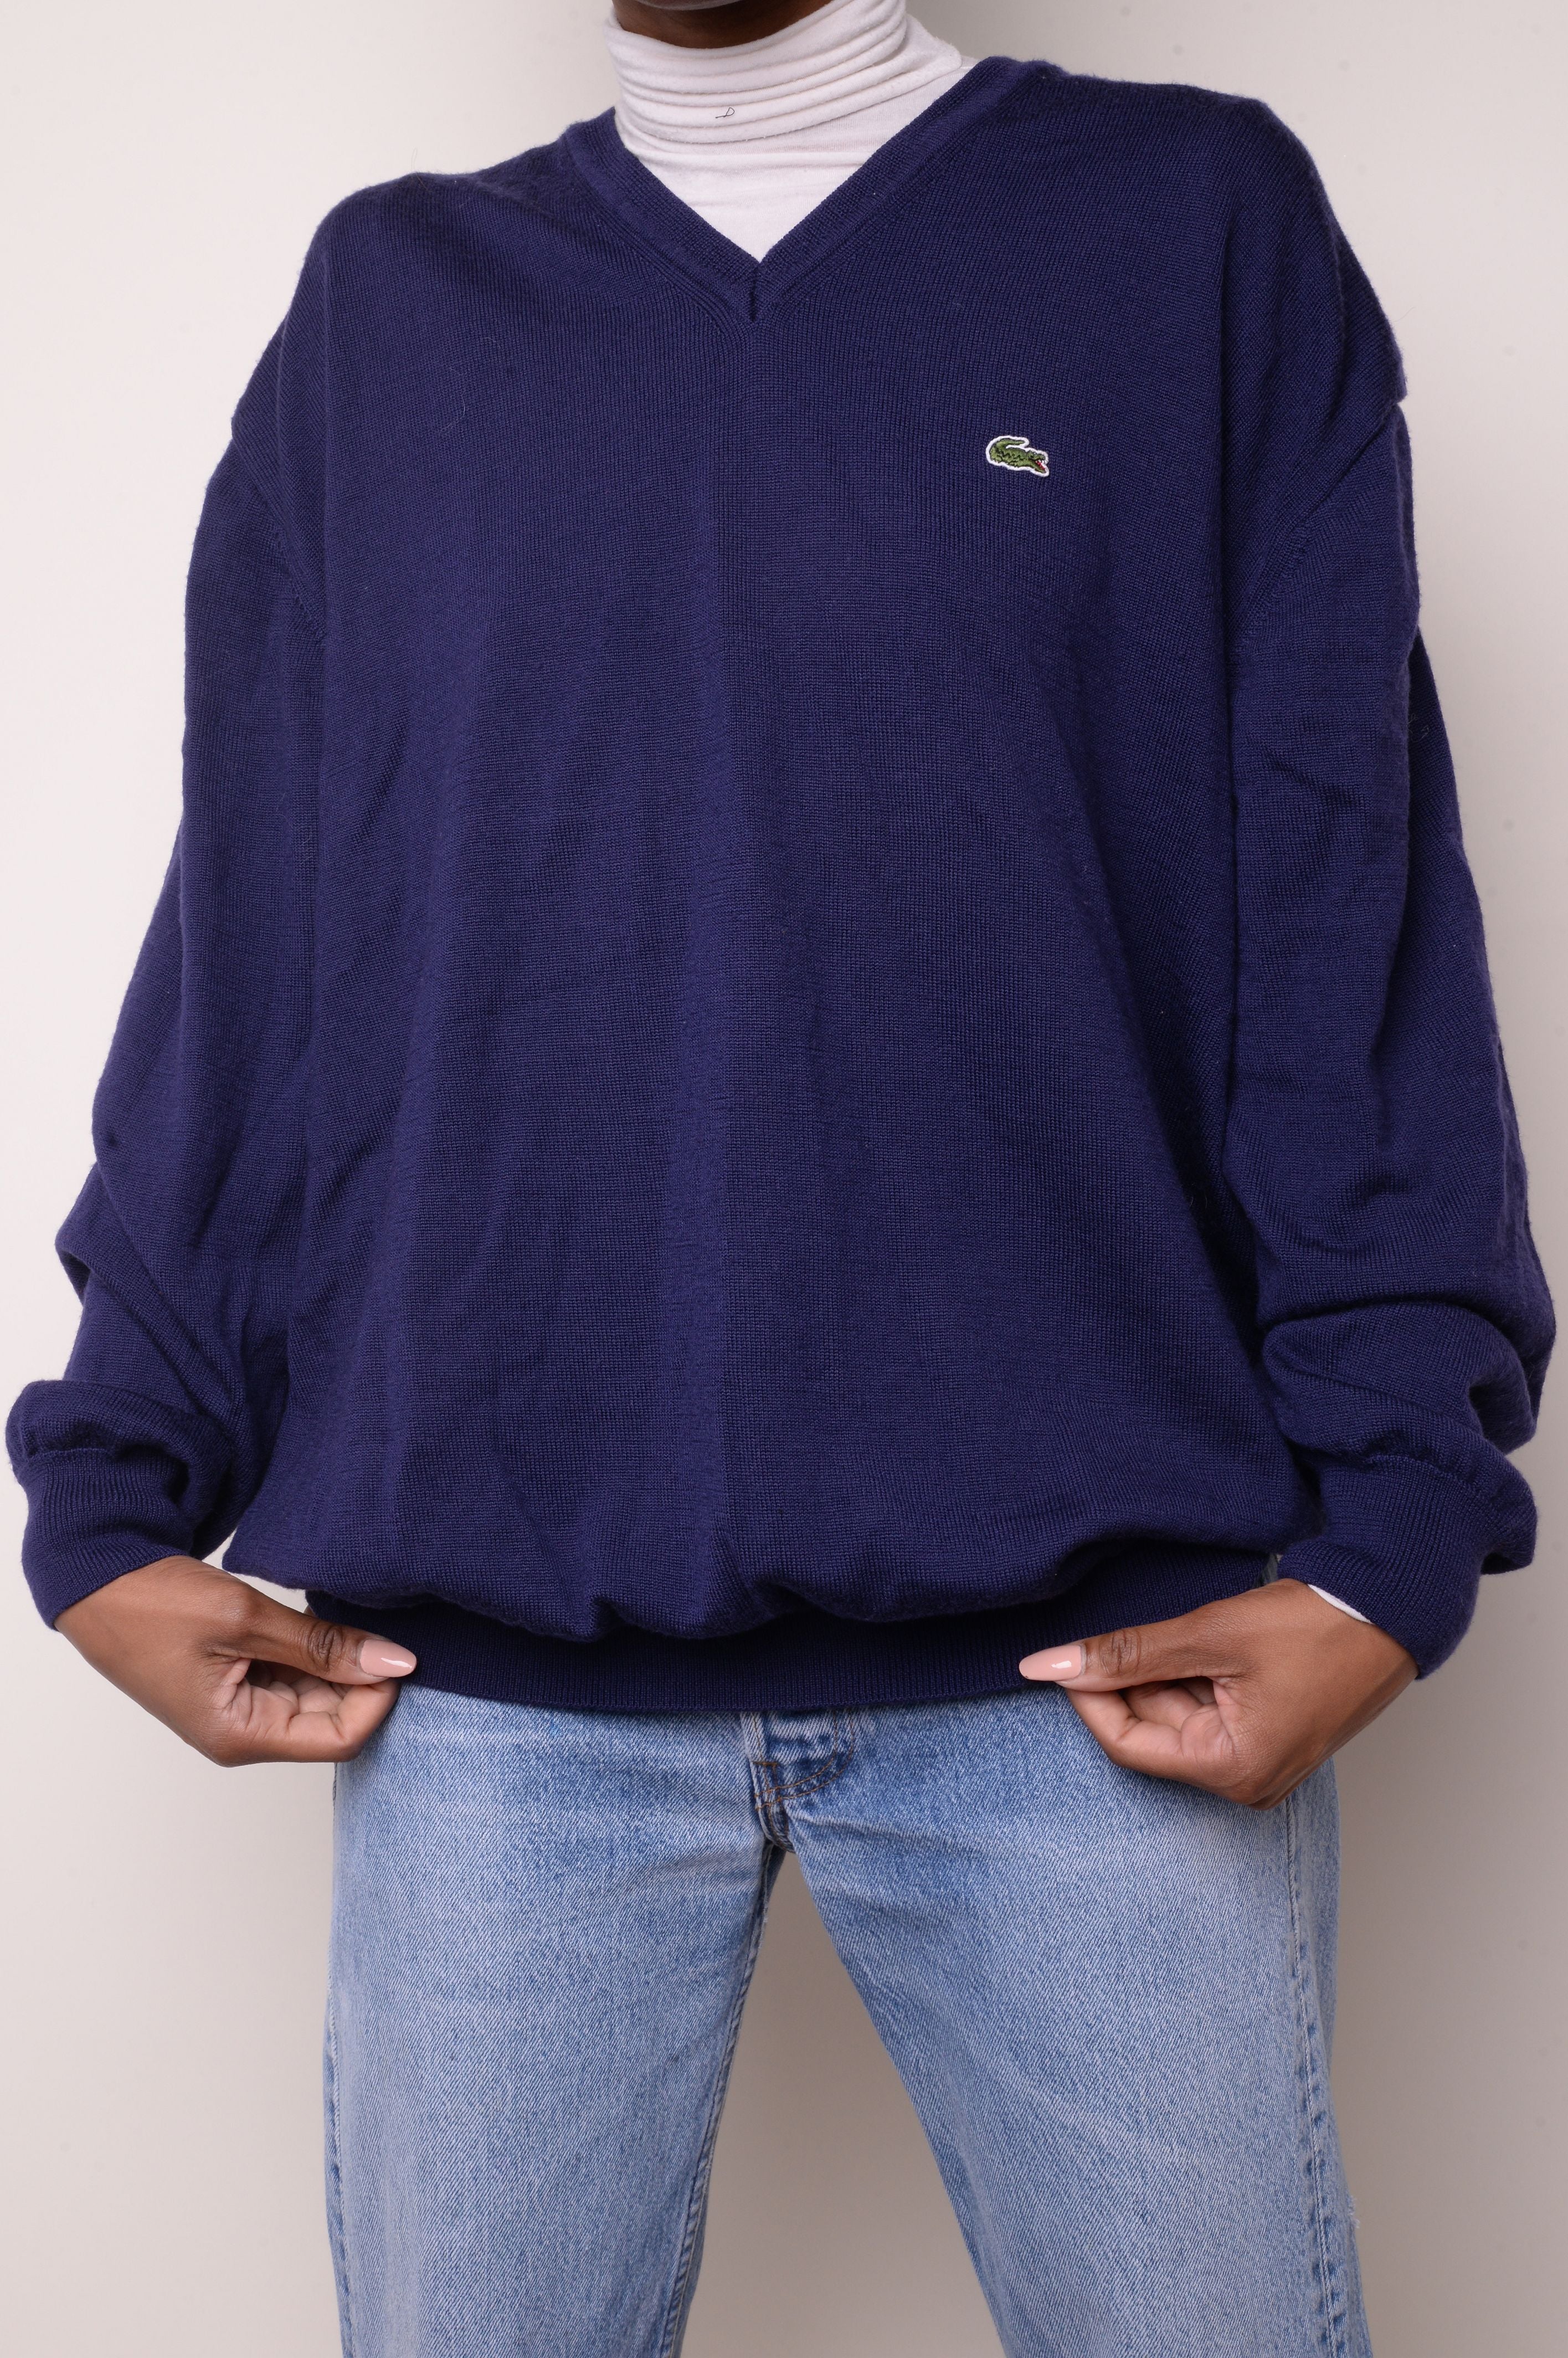 Navy Lacoste Sweater Free Shipping - The Vintage Twin